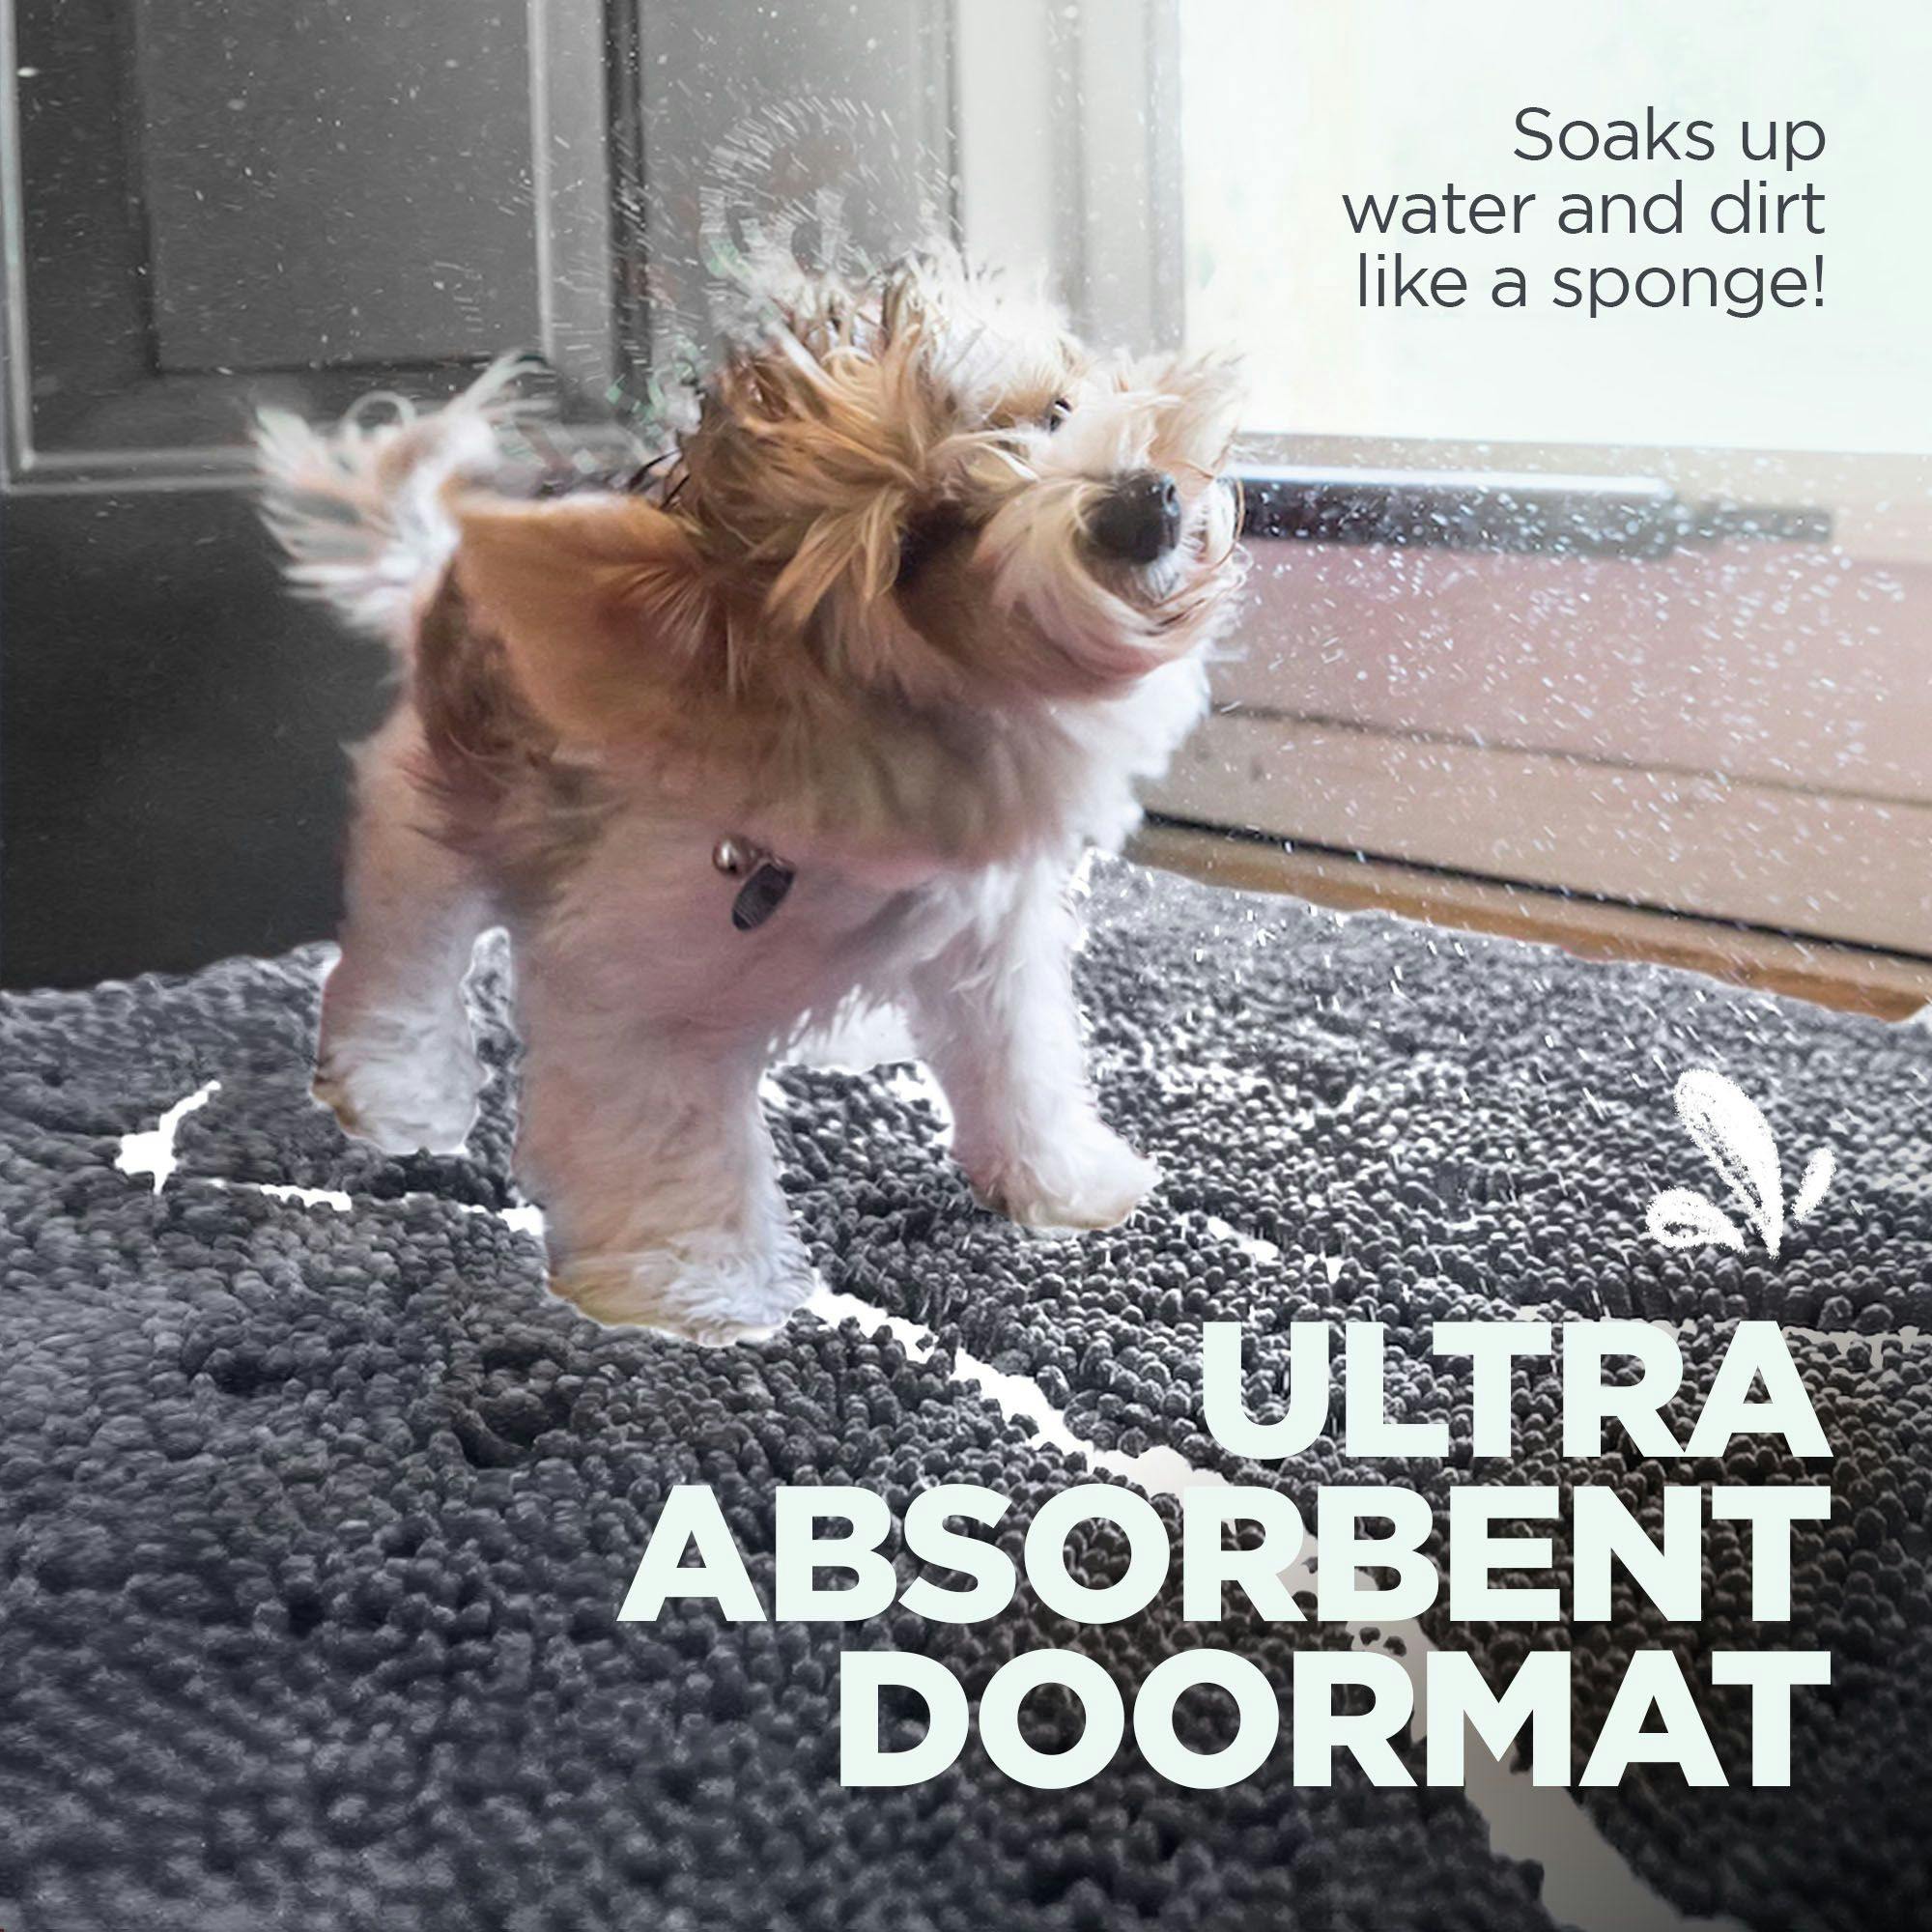 Showcase the Soggy Doggy Doormat!